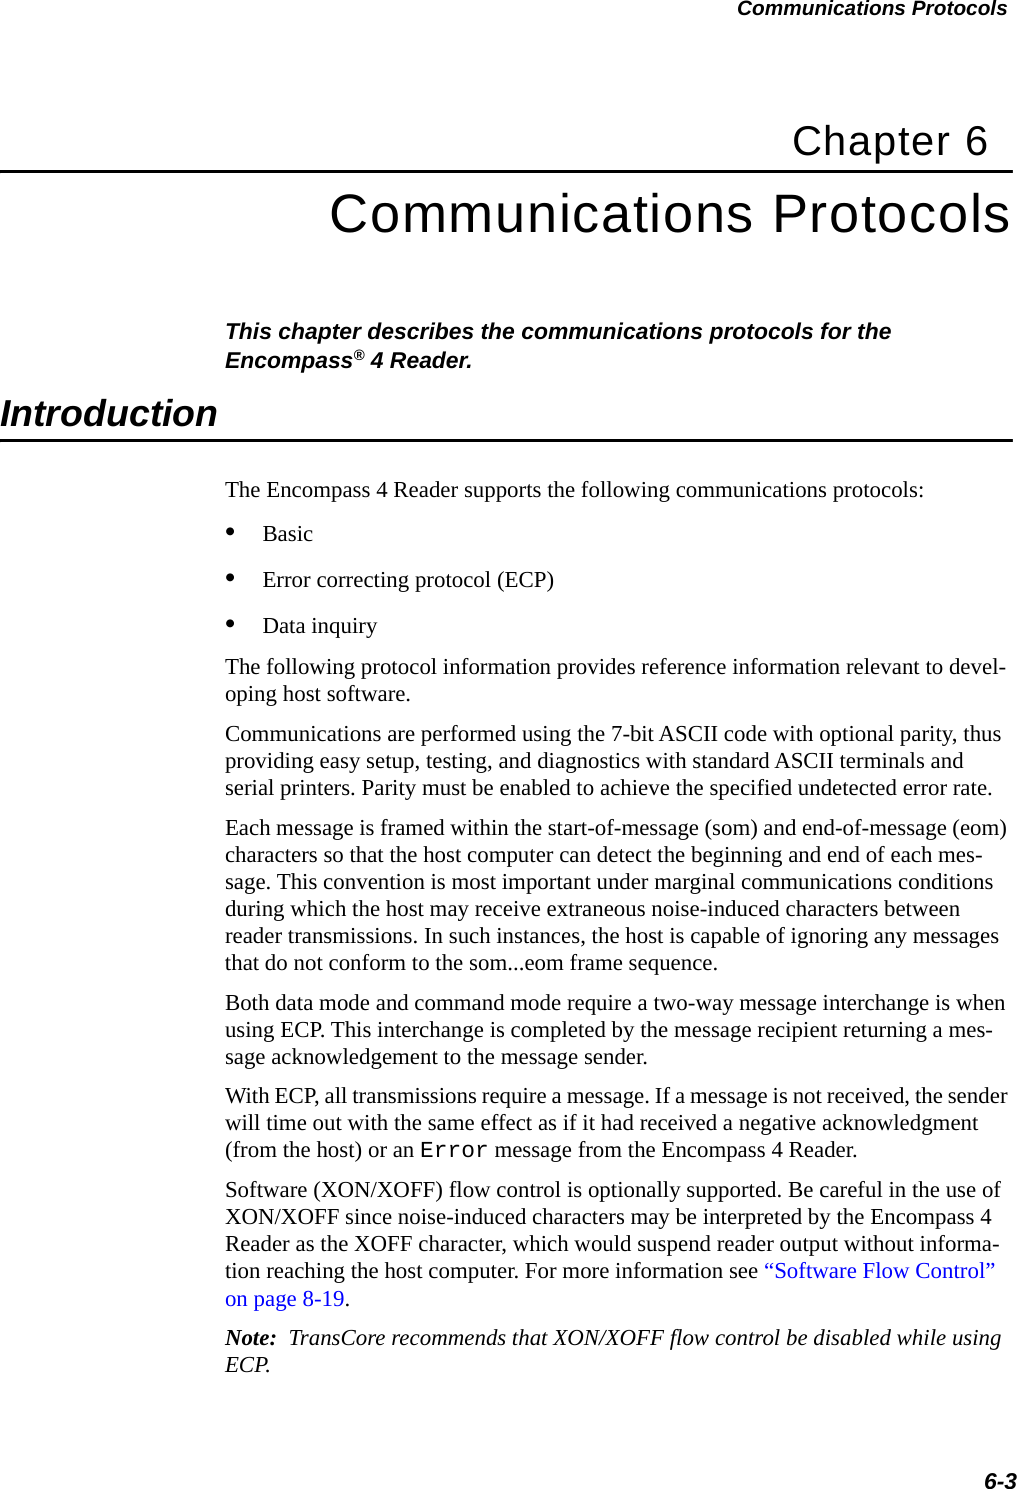 Communications Protocols6-3Chapter 6Communications ProtocolsThis chapter describes the communications protocols for the Encompass® 4 Reader.IntroductionThe Encompass 4 Reader supports the following communications protocols:•Basic•Error correcting protocol (ECP)•Data inquiryThe following protocol information provides reference information relevant to devel-oping host software.Communications are performed using the 7-bit ASCII code with optional parity, thus providing easy setup, testing, and diagnostics with standard ASCII terminals and serial printers. Parity must be enabled to achieve the specified undetected error rate.Each message is framed within the start-of-message (som) and end-of-message (eom) characters so that the host computer can detect the beginning and end of each mes-sage. This convention is most important under marginal communications conditions during which the host may receive extraneous noise-induced characters between reader transmissions. In such instances, the host is capable of ignoring any messages that do not conform to the som...eom frame sequence.Both data mode and command mode require a two-way message interchange is when using ECP. This interchange is completed by the message recipient returning a mes-sage acknowledgement to the message sender.With ECP, all transmissions require a message. If a message is not received, the sender will time out with the same effect as if it had received a negative acknowledgment (from the host) or an Error message from the Encompass 4 Reader.Software (XON/XOFF) flow control is optionally supported. Be careful in the use of XON/XOFF since noise-induced characters may be interpreted by the Encompass 4 Reader as the XOFF character, which would suspend reader output without informa-tion reaching the host computer. For more information see “Software Flow Control” on page 8-19.Note:  TransCore recommends that XON/XOFF flow control be disabled while using ECP.